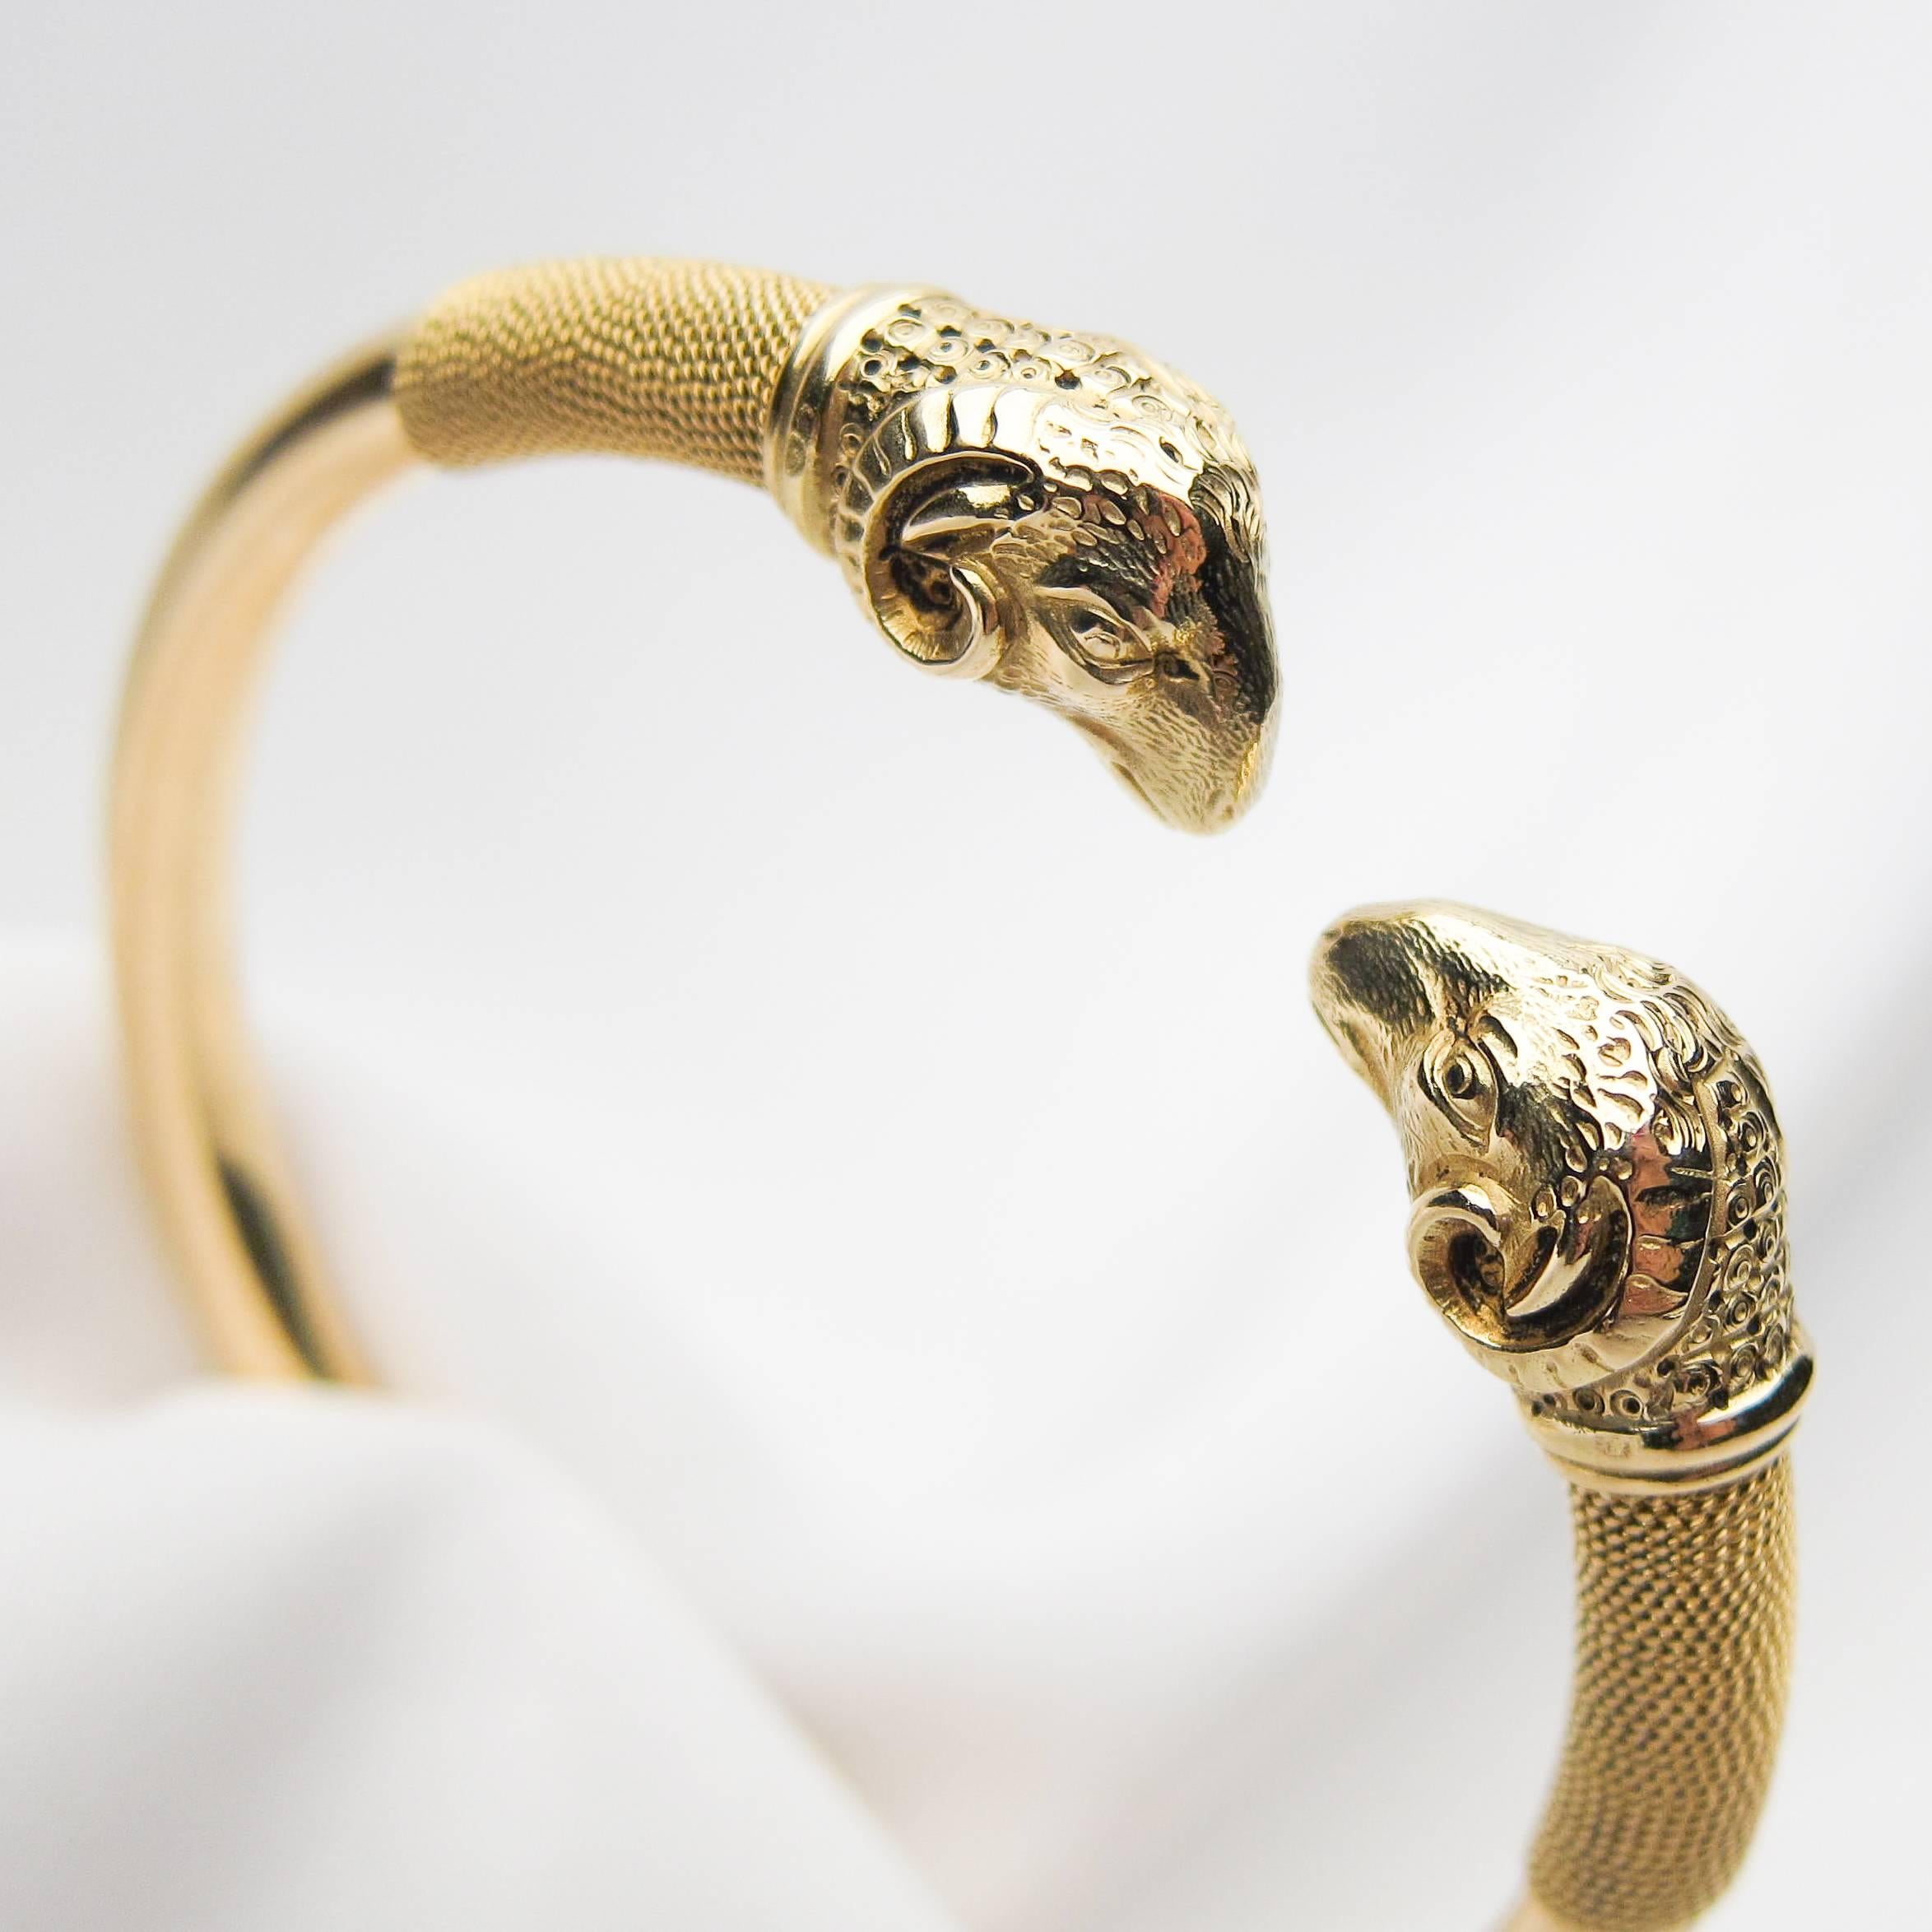 Circa 1900. This mesmerizing Late Victorian Era 18KT gold bangle features two beautifully detailed ram's heads facing one another from each end of the cuff-style bracelet. Delicate gold rope accents add a lovely textural note against the smooth